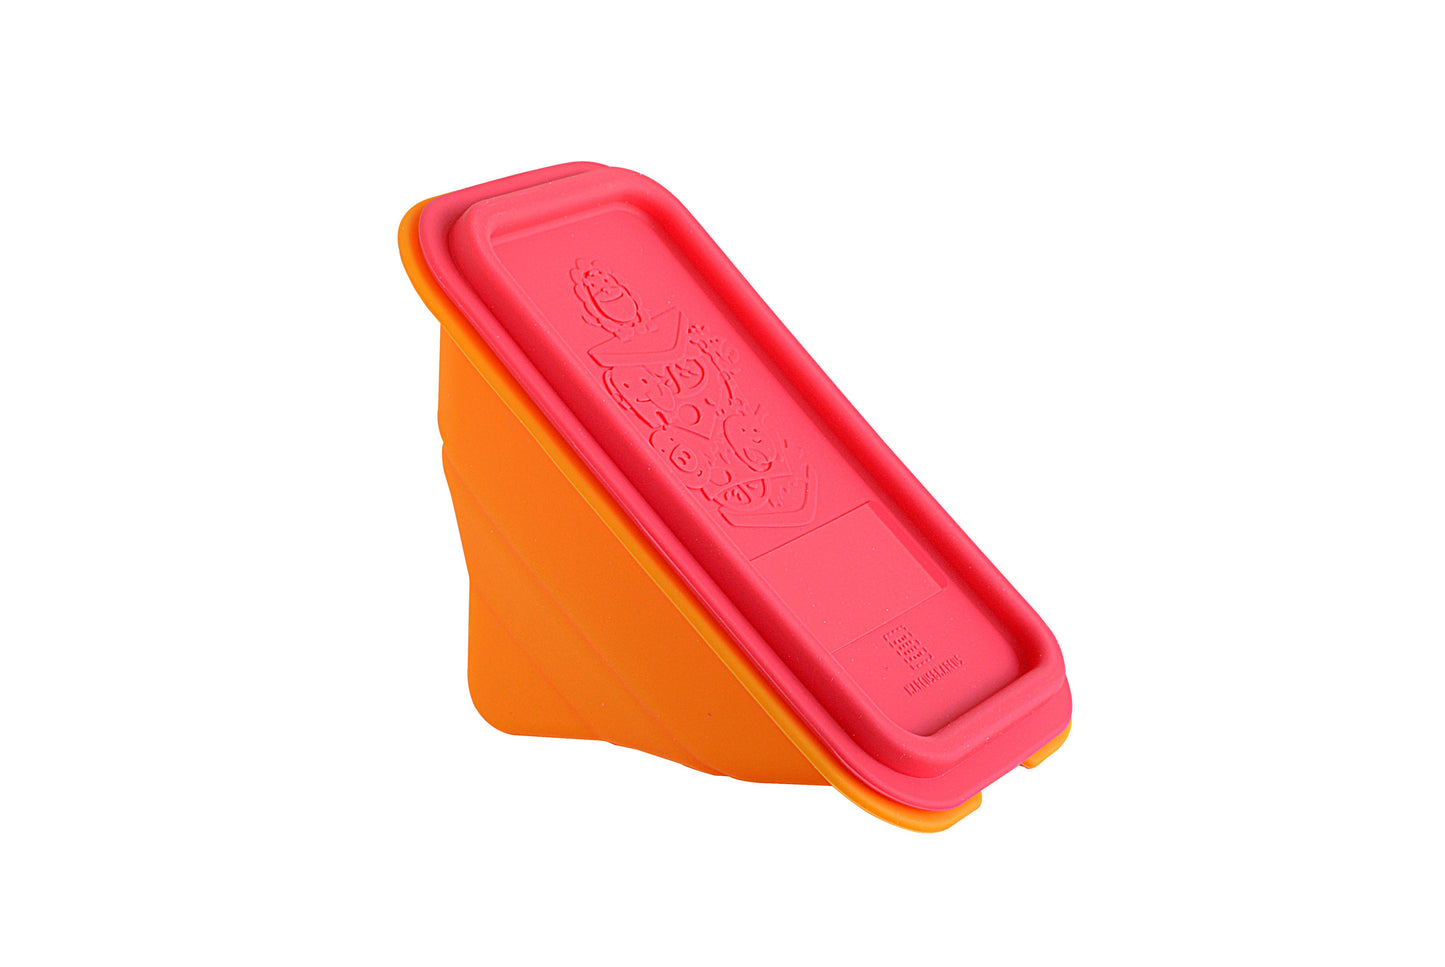 Marcus n Marcus - Collapsible Sandwich Wedge Container - Lion